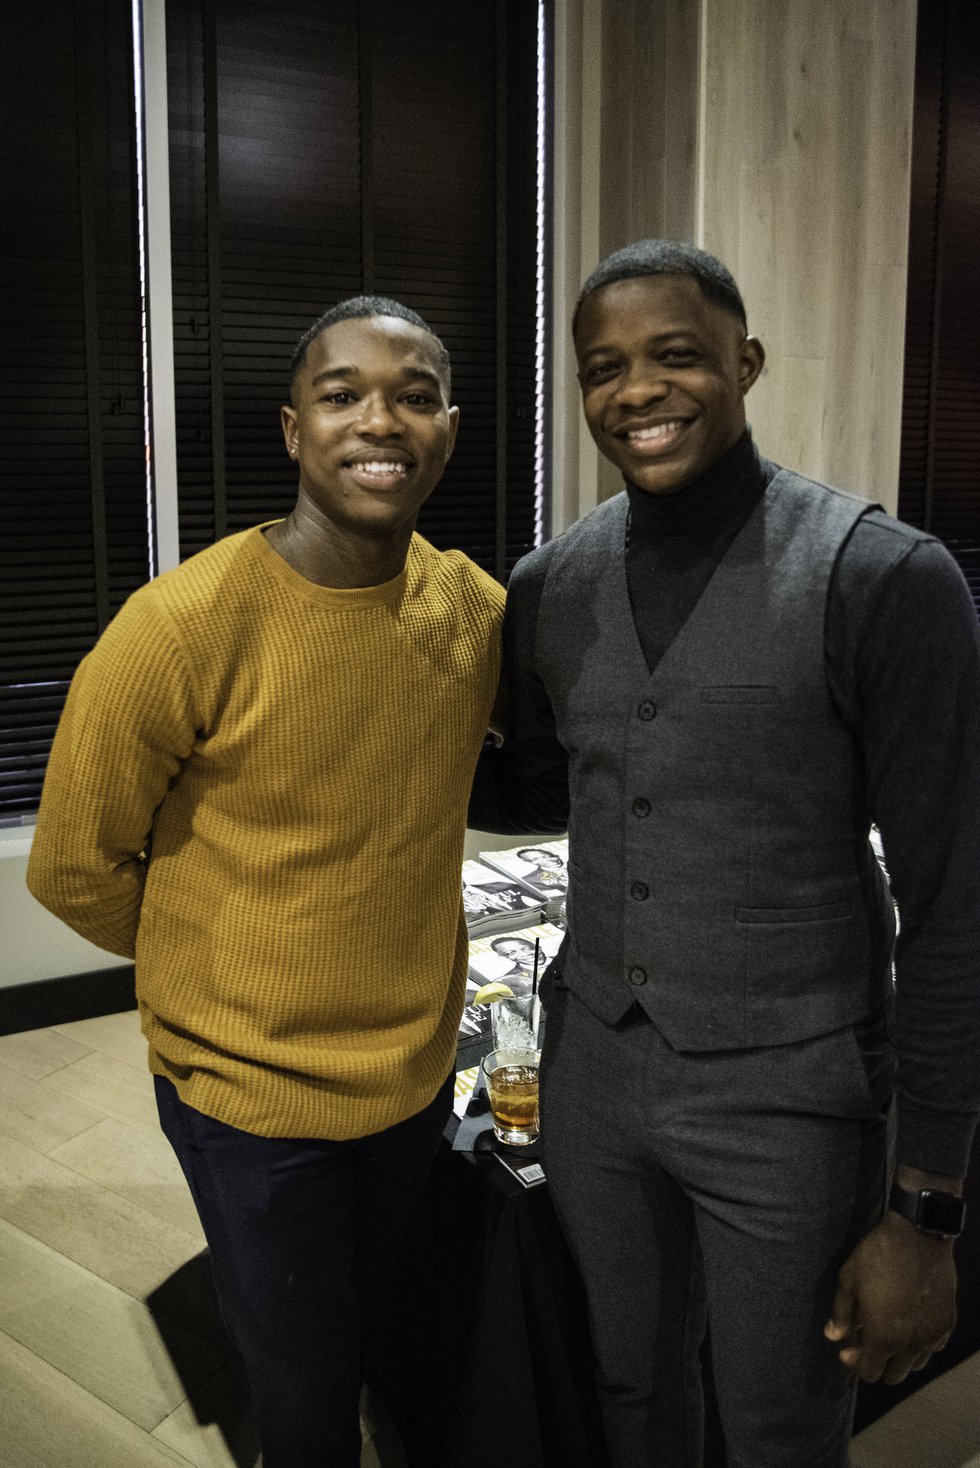 Shaheed Whitfield and James Shaw .jpg